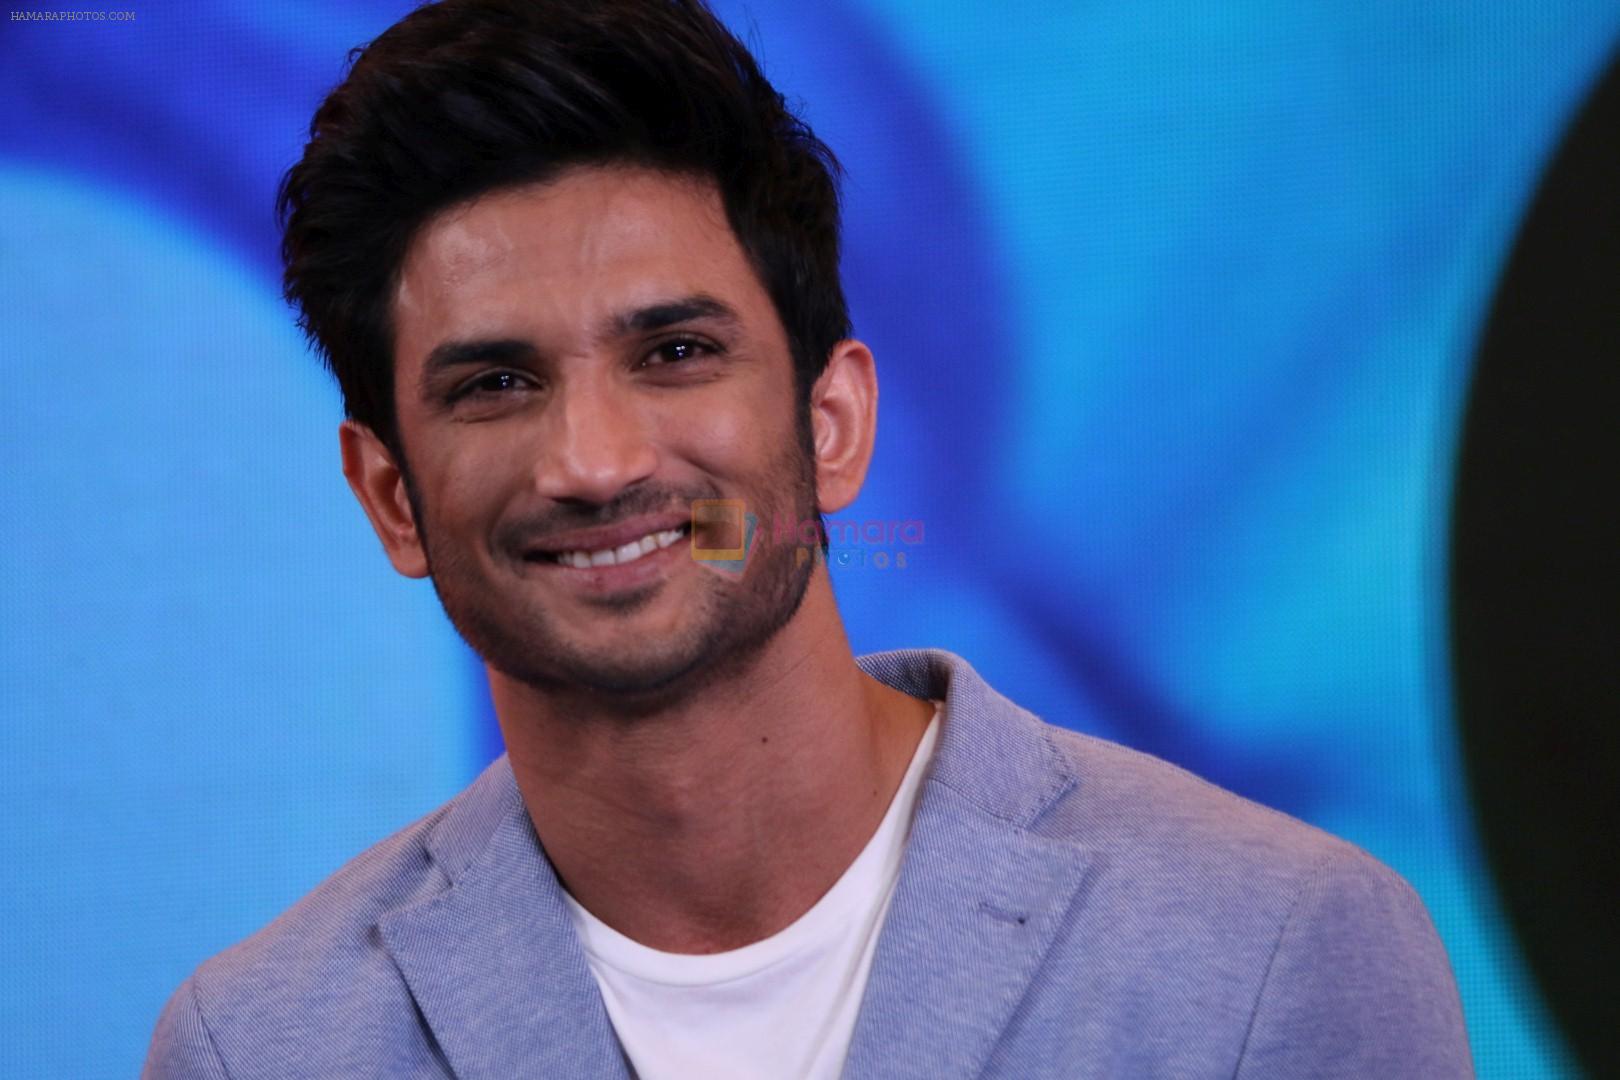 Sushant Singh Rajput At The Launch Of Behtar India Campaign on 8th March 2017